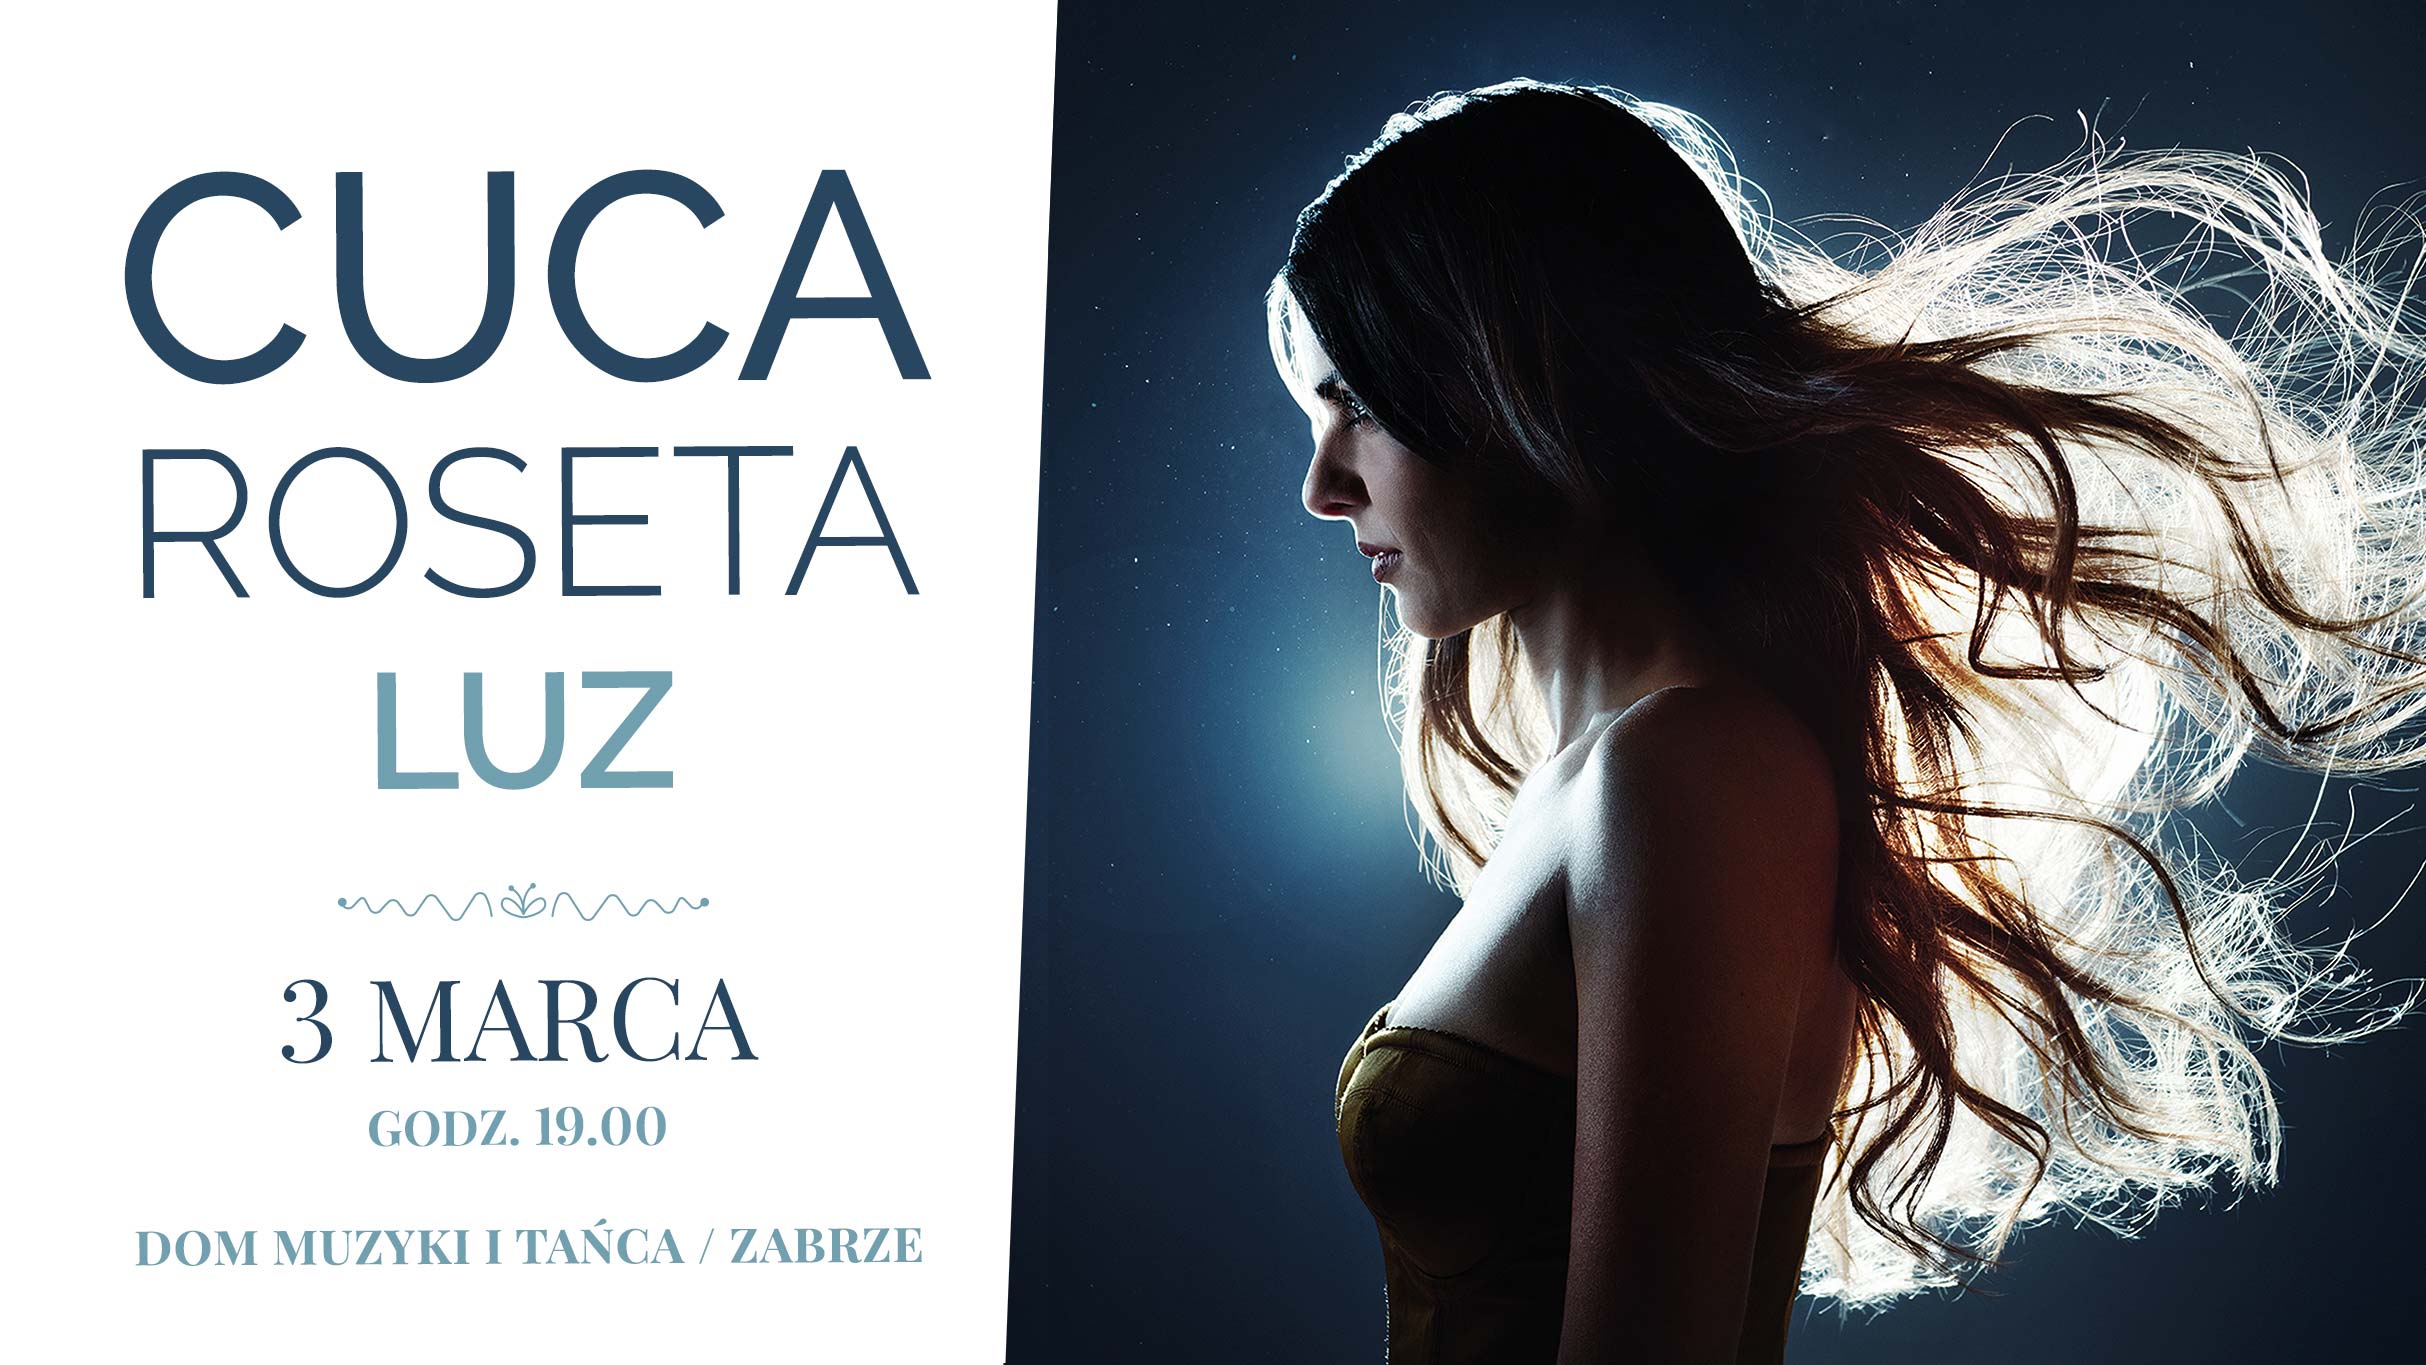 exclusive presale password for Cuca Roseta affordable tickets in London at Bloomsbury Theatre